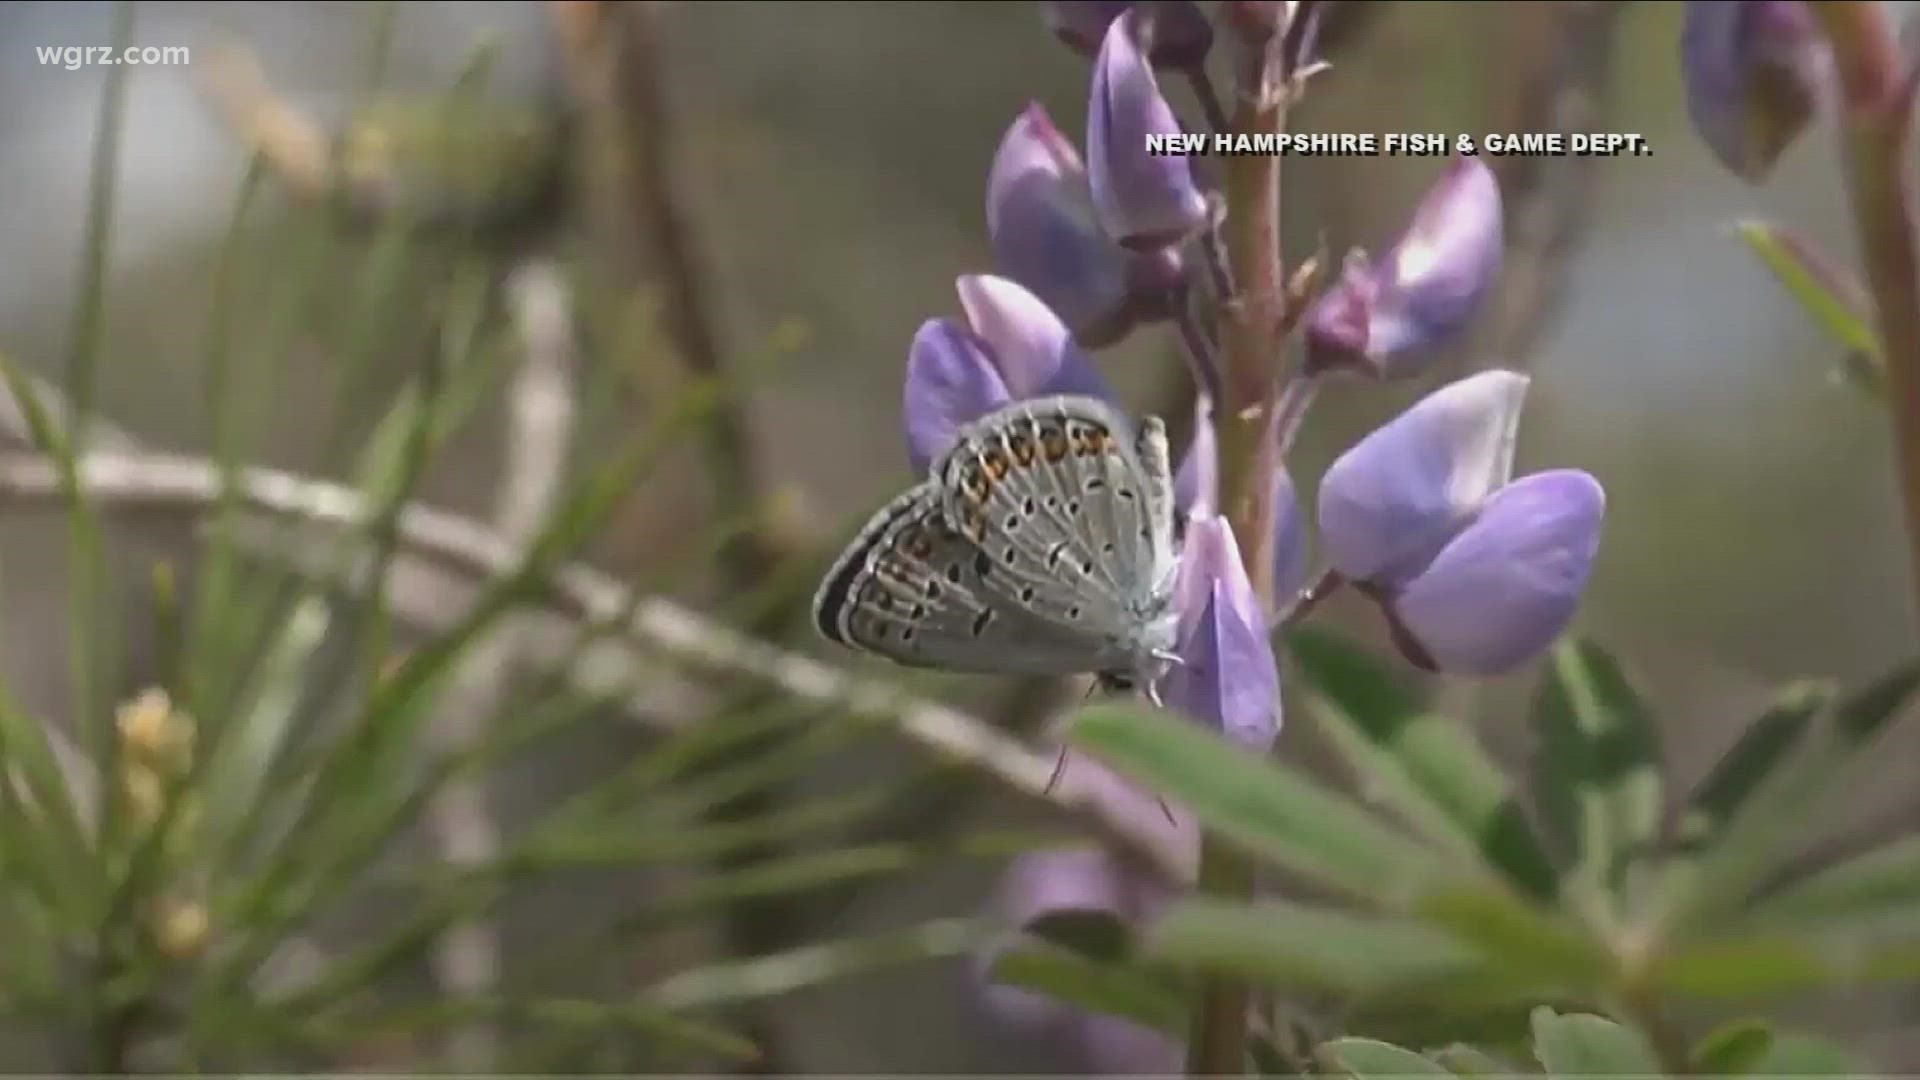 The plight of the Karner blue butterfly is yet another warning about the fragility of nature. Their numbers have dropped during the past two decades.